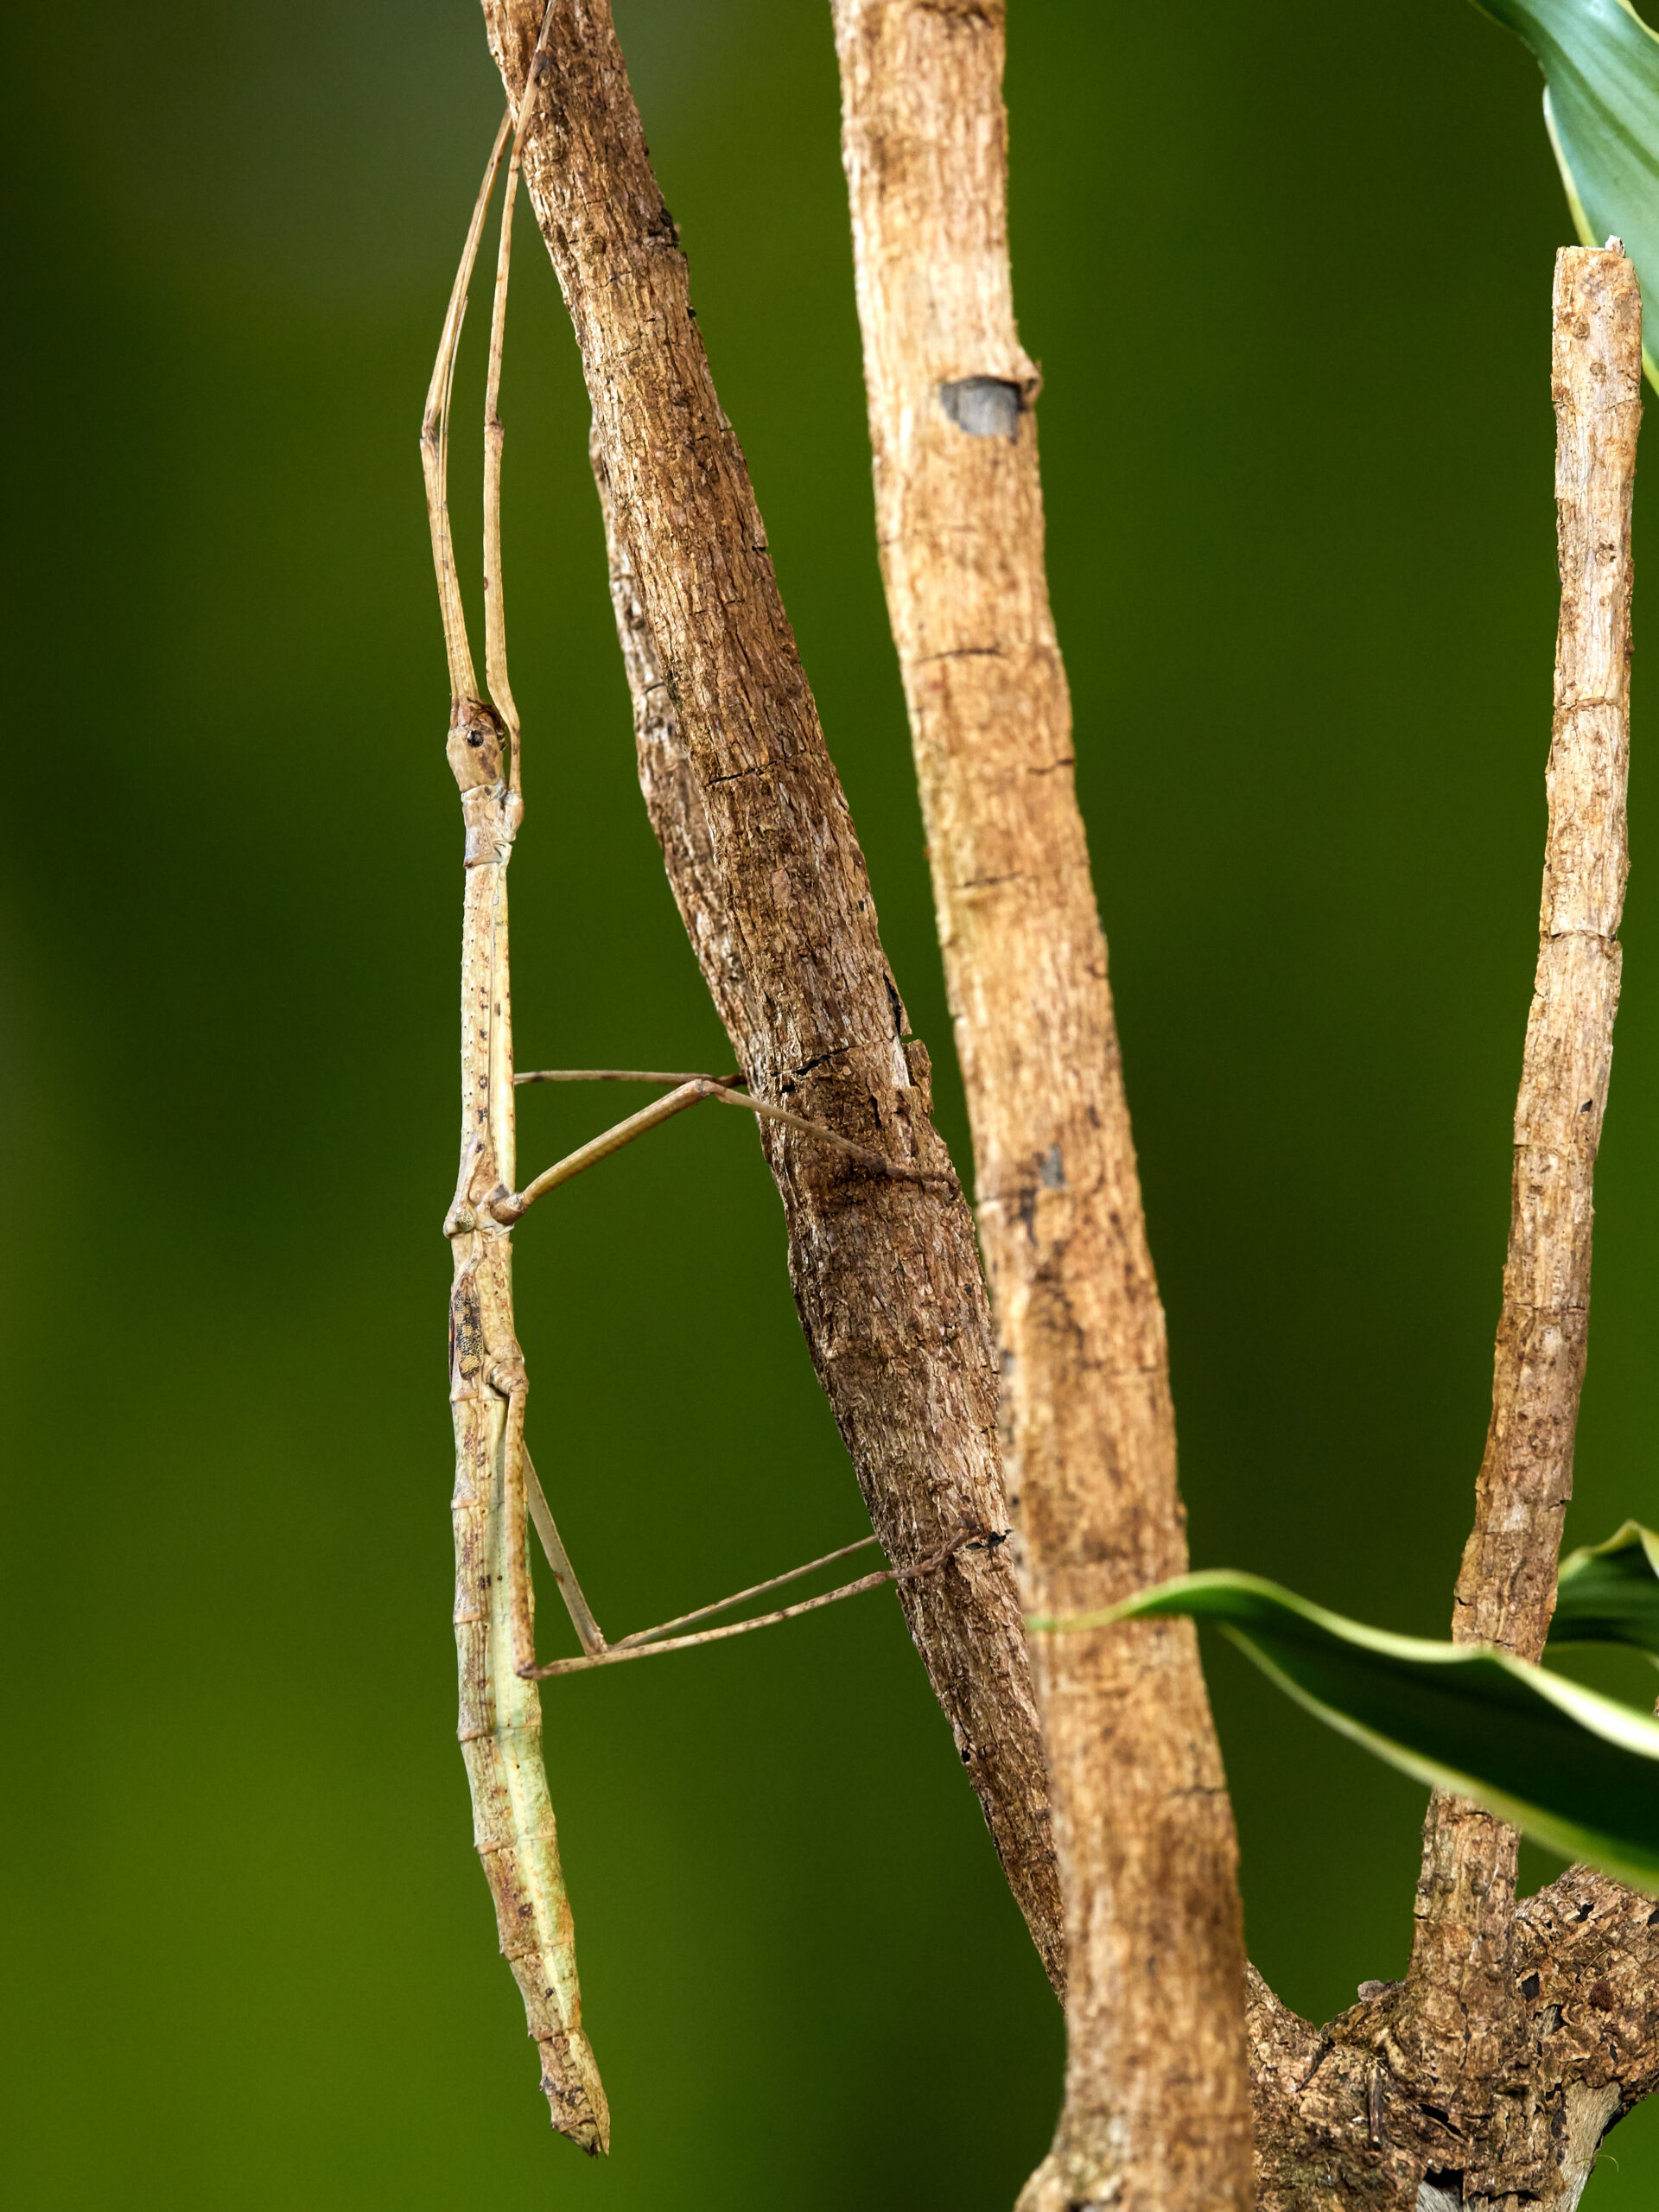 A macro shot of a Stick Insect, scientifically known as Carausius morosus, photographed up close. The insect has a brown, stick-like body with thin legs and antennae, and its camouflage adaptation to mimic a twig is visible in the image.